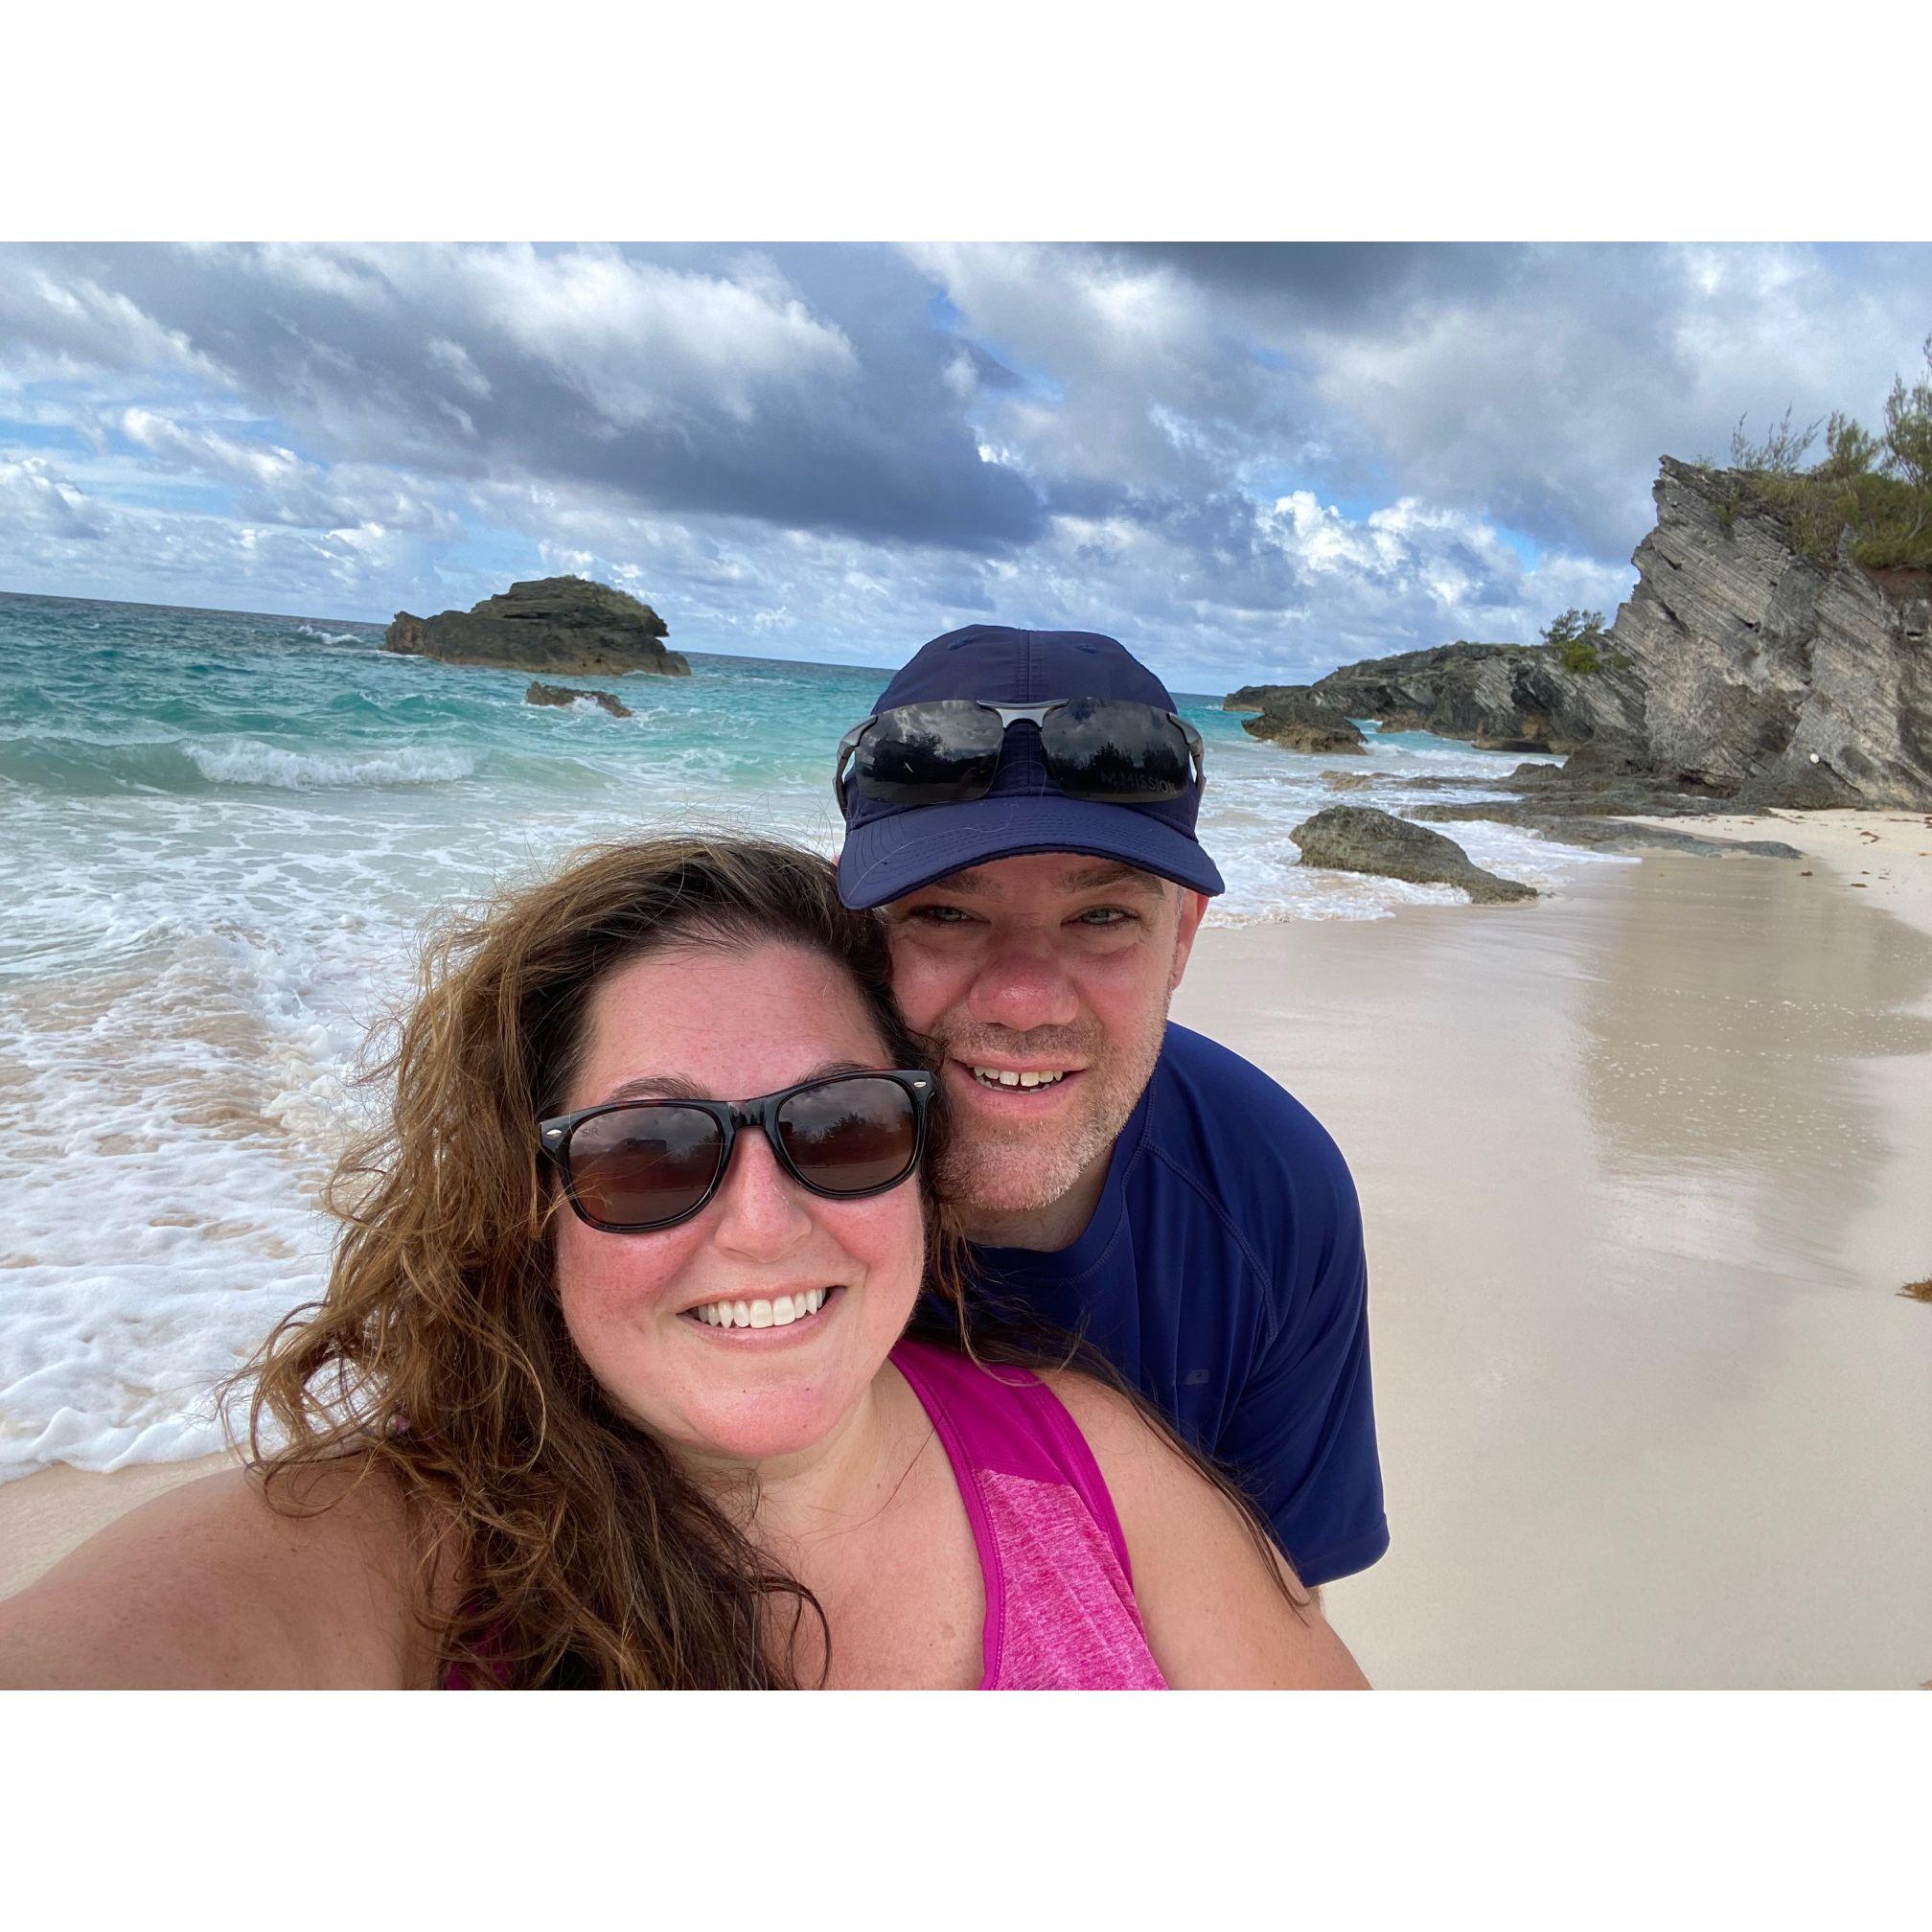 Bermuda August 2023 - one of our favorite trips!